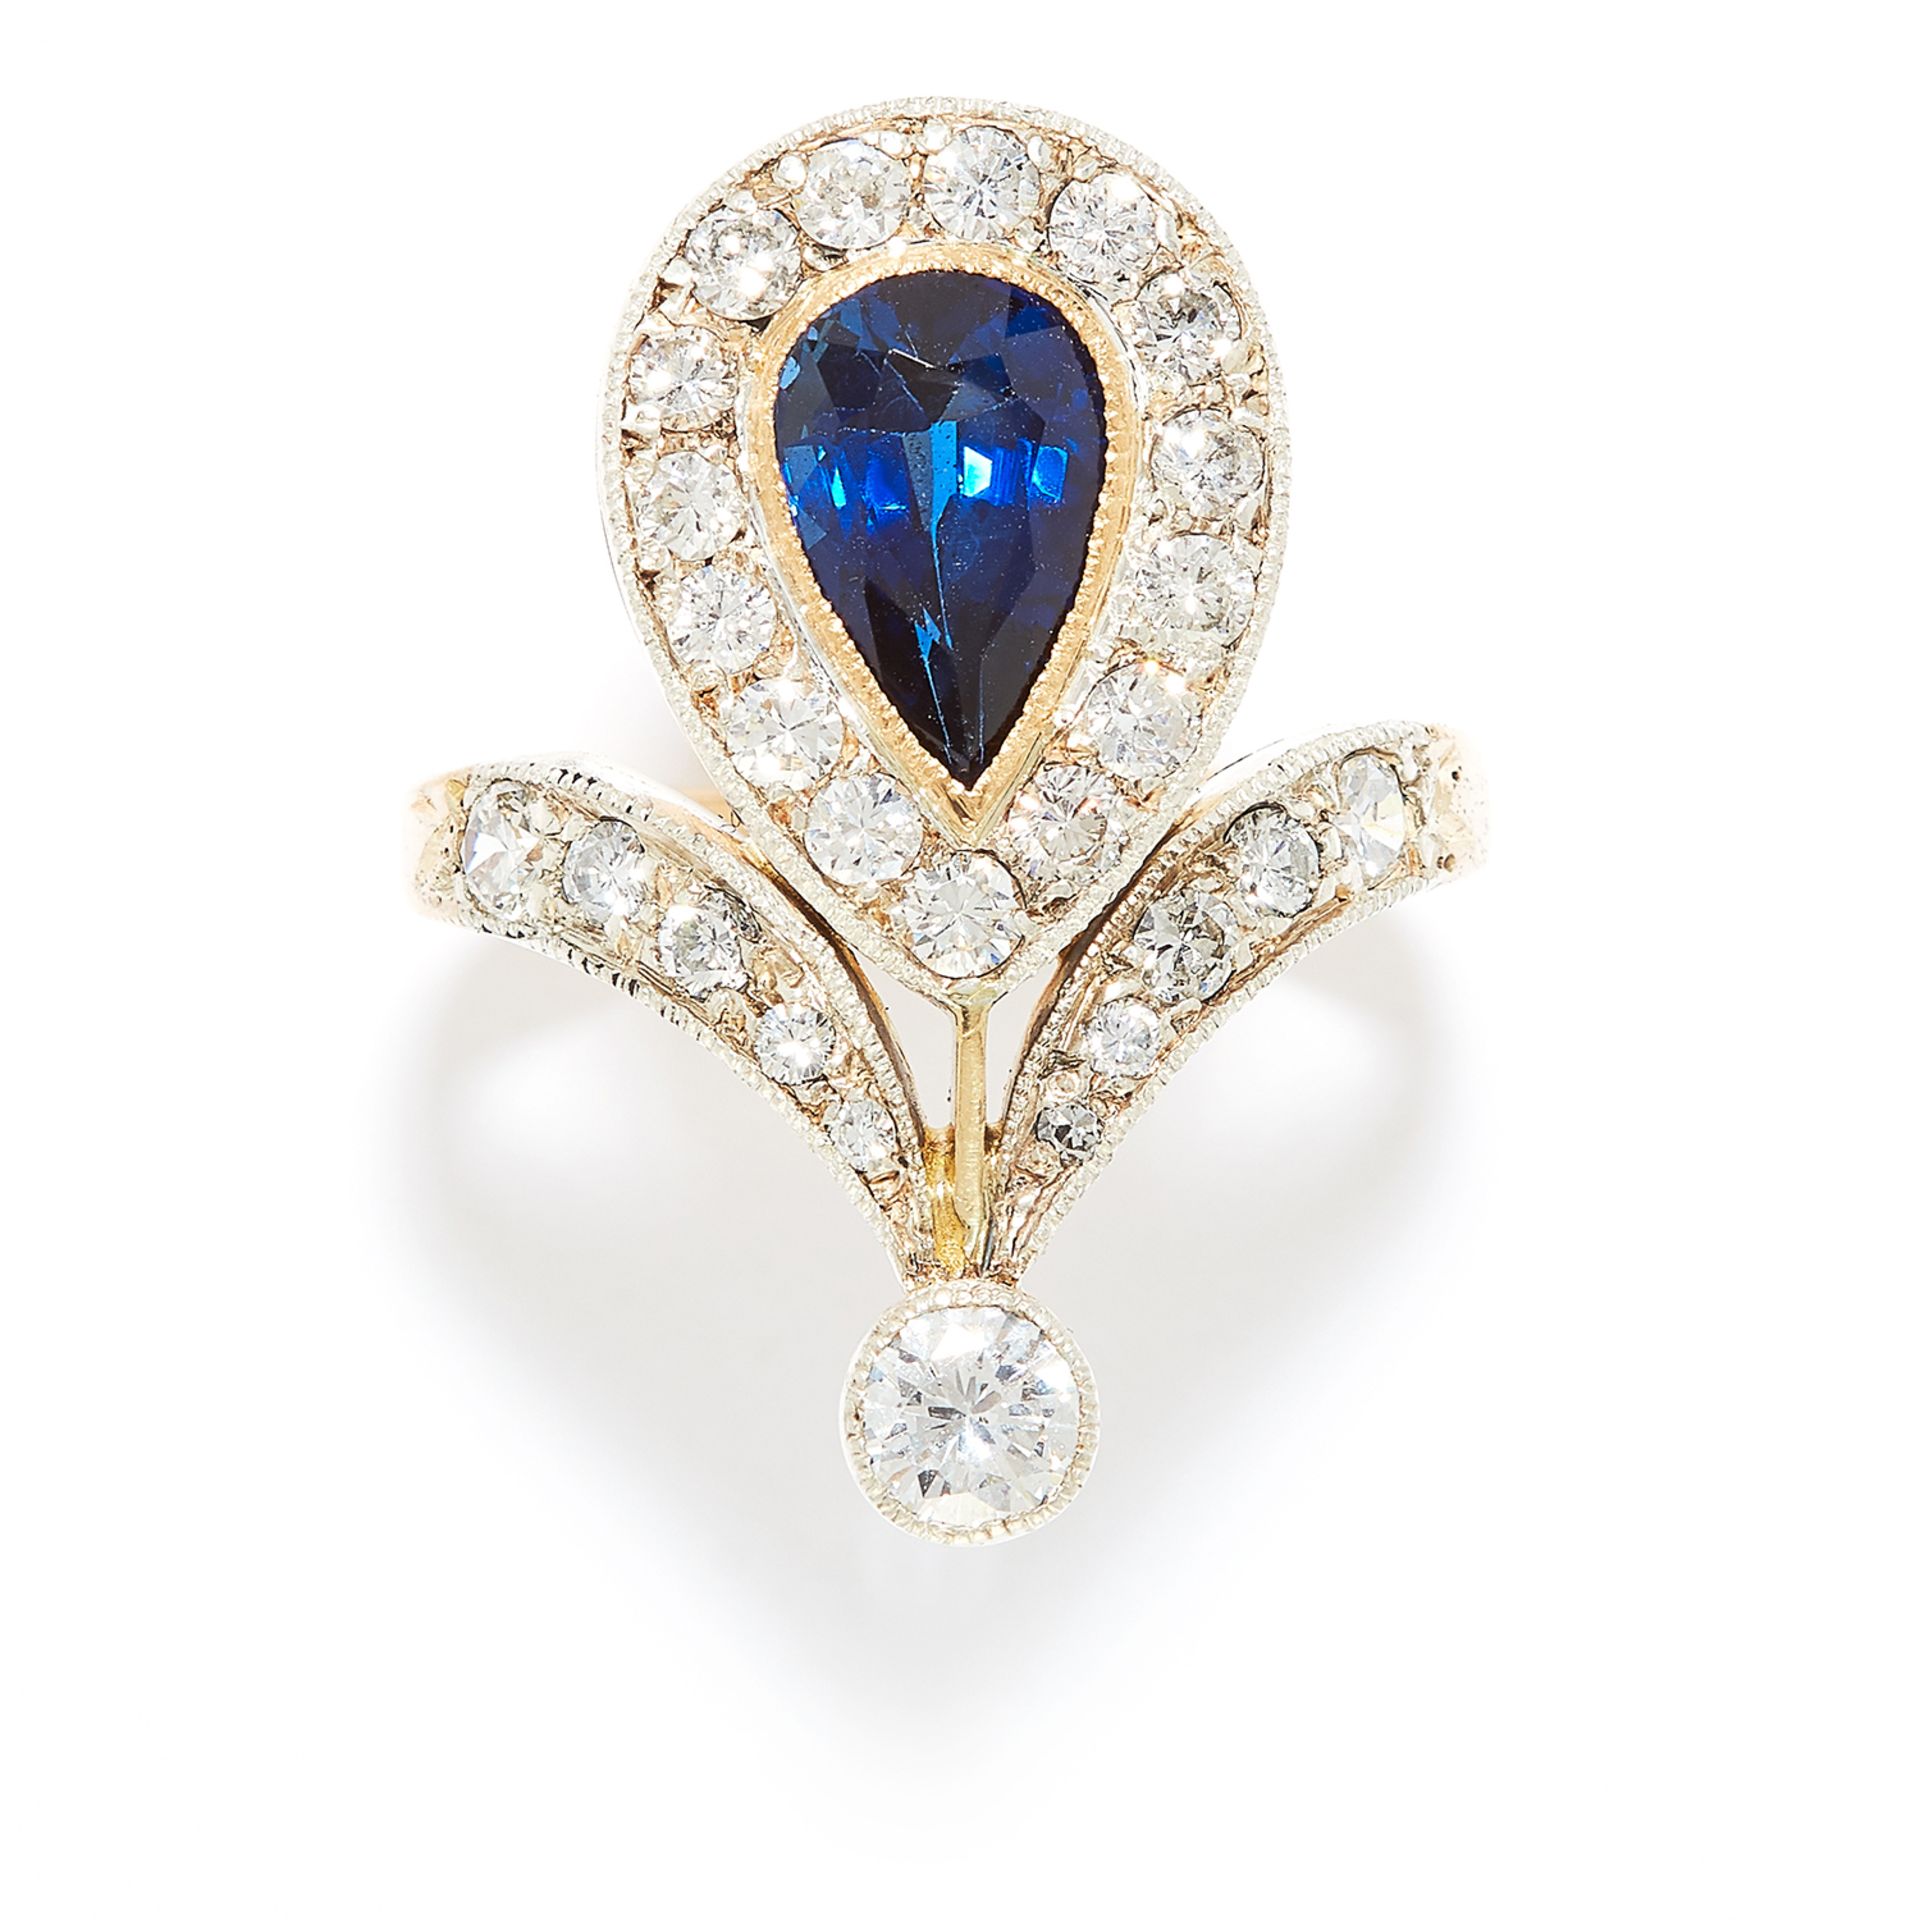 ANTIQUE SAPPHIRE AND DIAMOND RING in 18ct yellow gold and silver, the pear shaped sapphire of 1.72